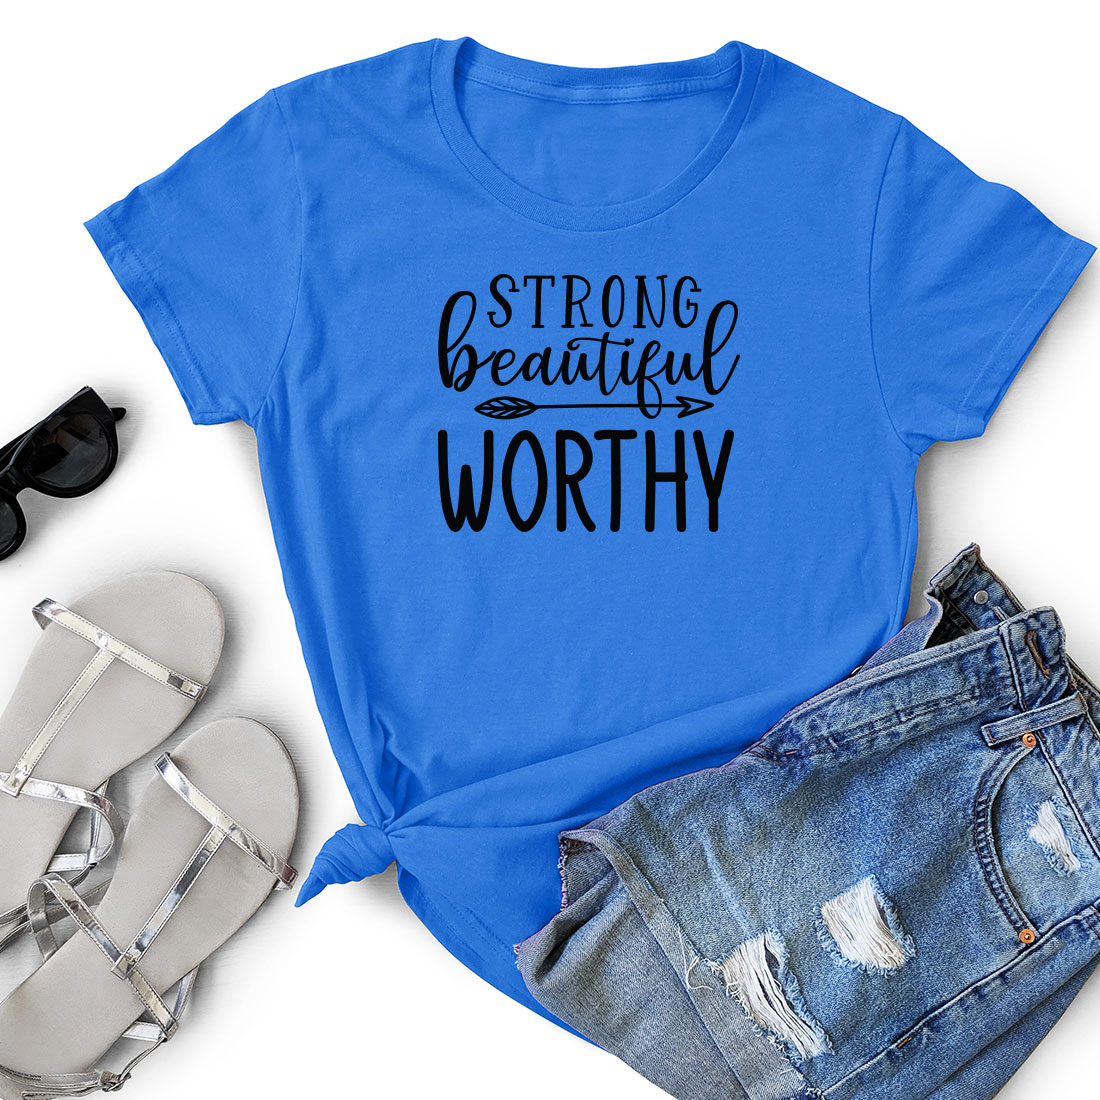 T - shirt that says strong beautiful worthy.